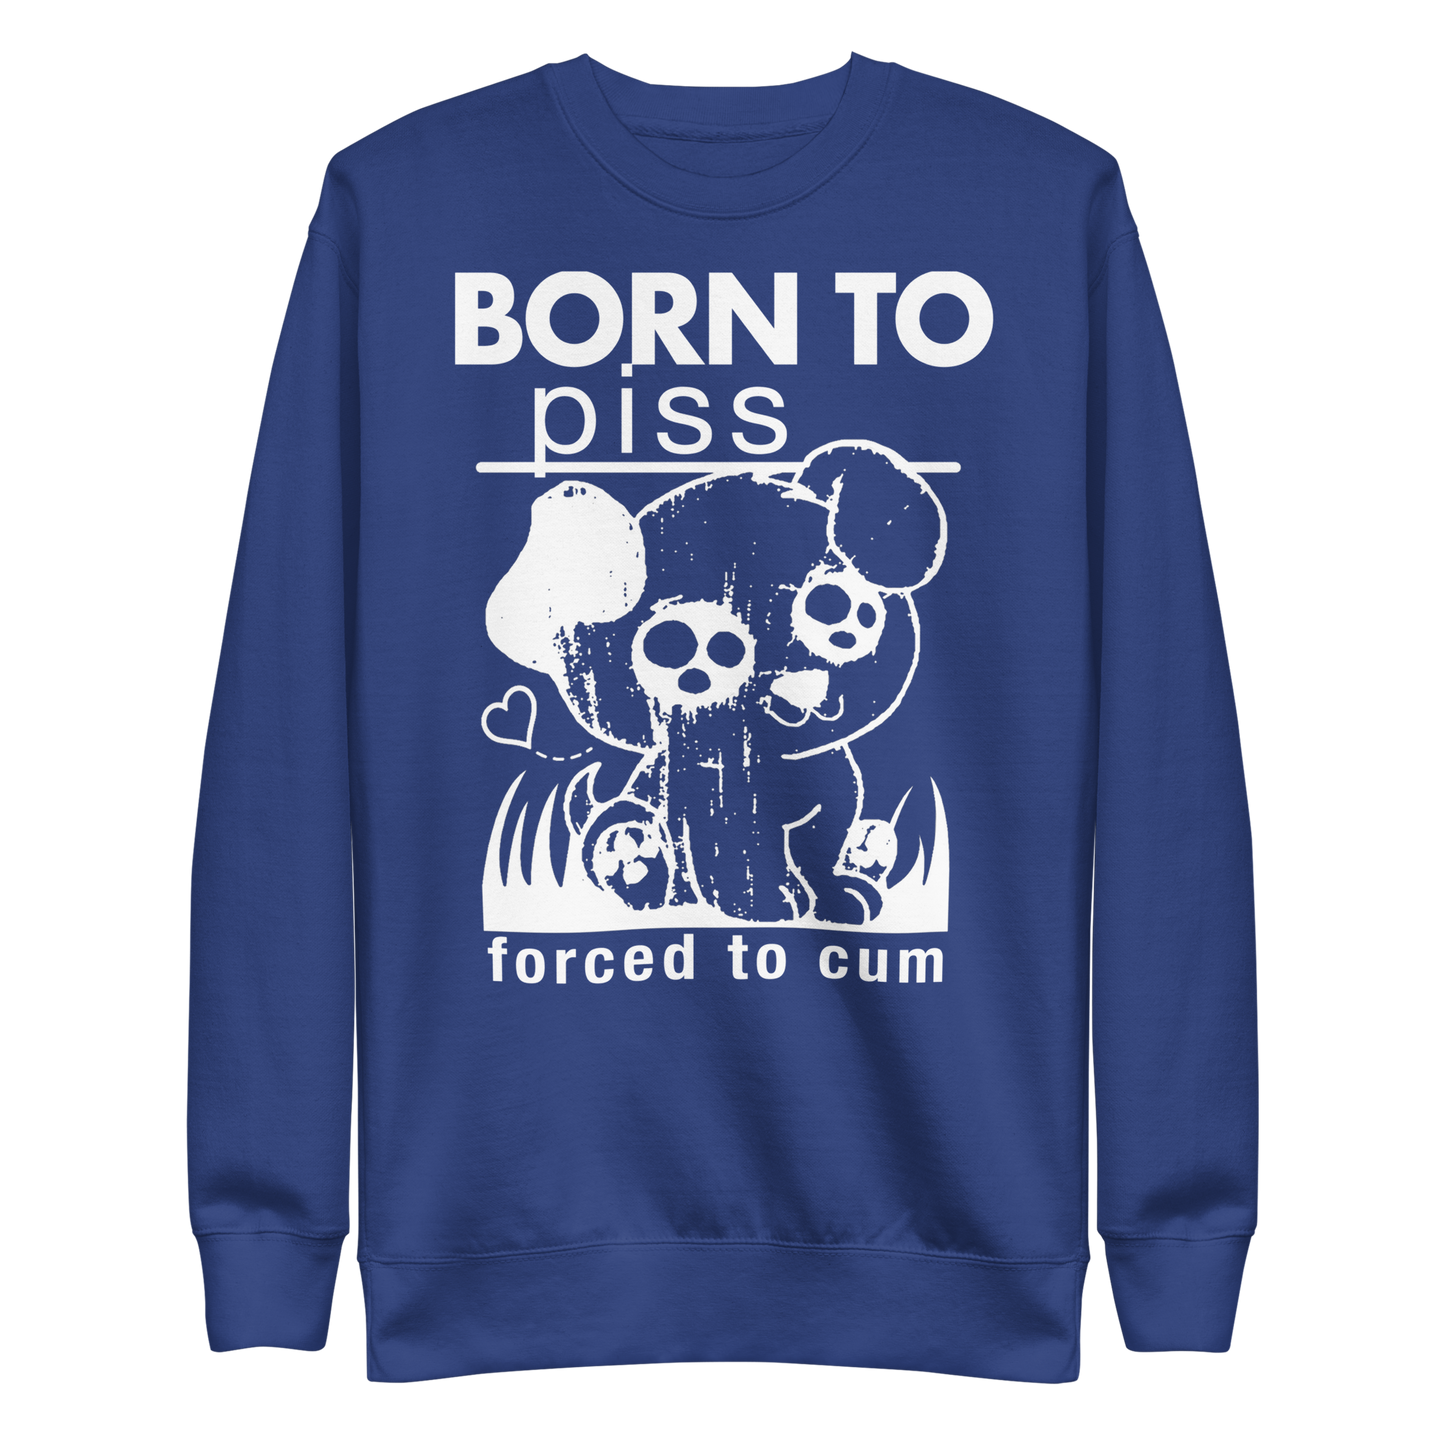 Born To Piss, Forced To Cum Crewneck.